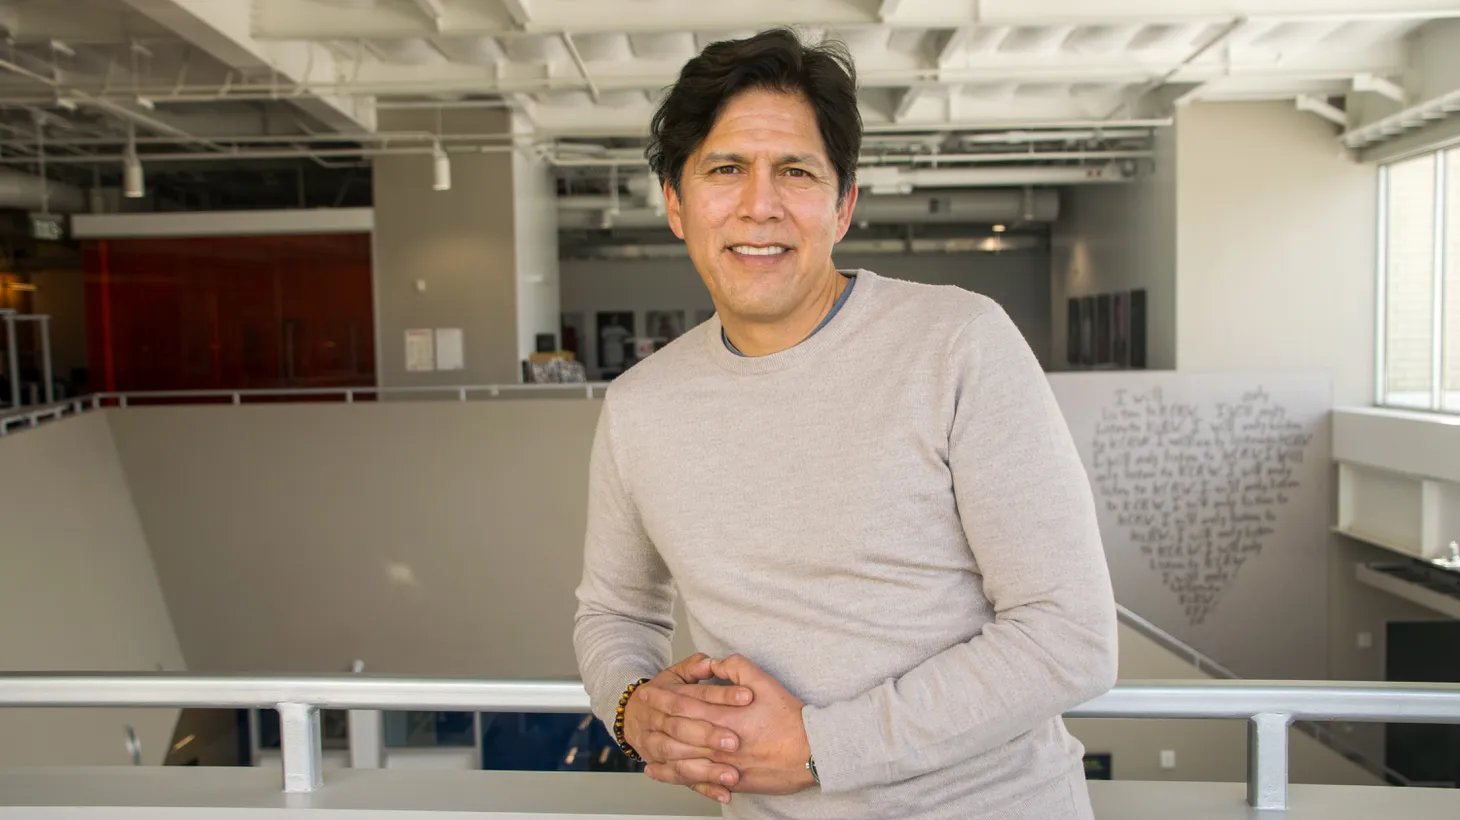 Kevin De Leon appears at KCRW headquarters, April 4, 2022. “This [homelessness] is not exclusive to just building. This is about acquiring commercial properties, taking advantage of vacancies that already exist today to move folks quickly off the streets, and to put a roof over their head,” he says.